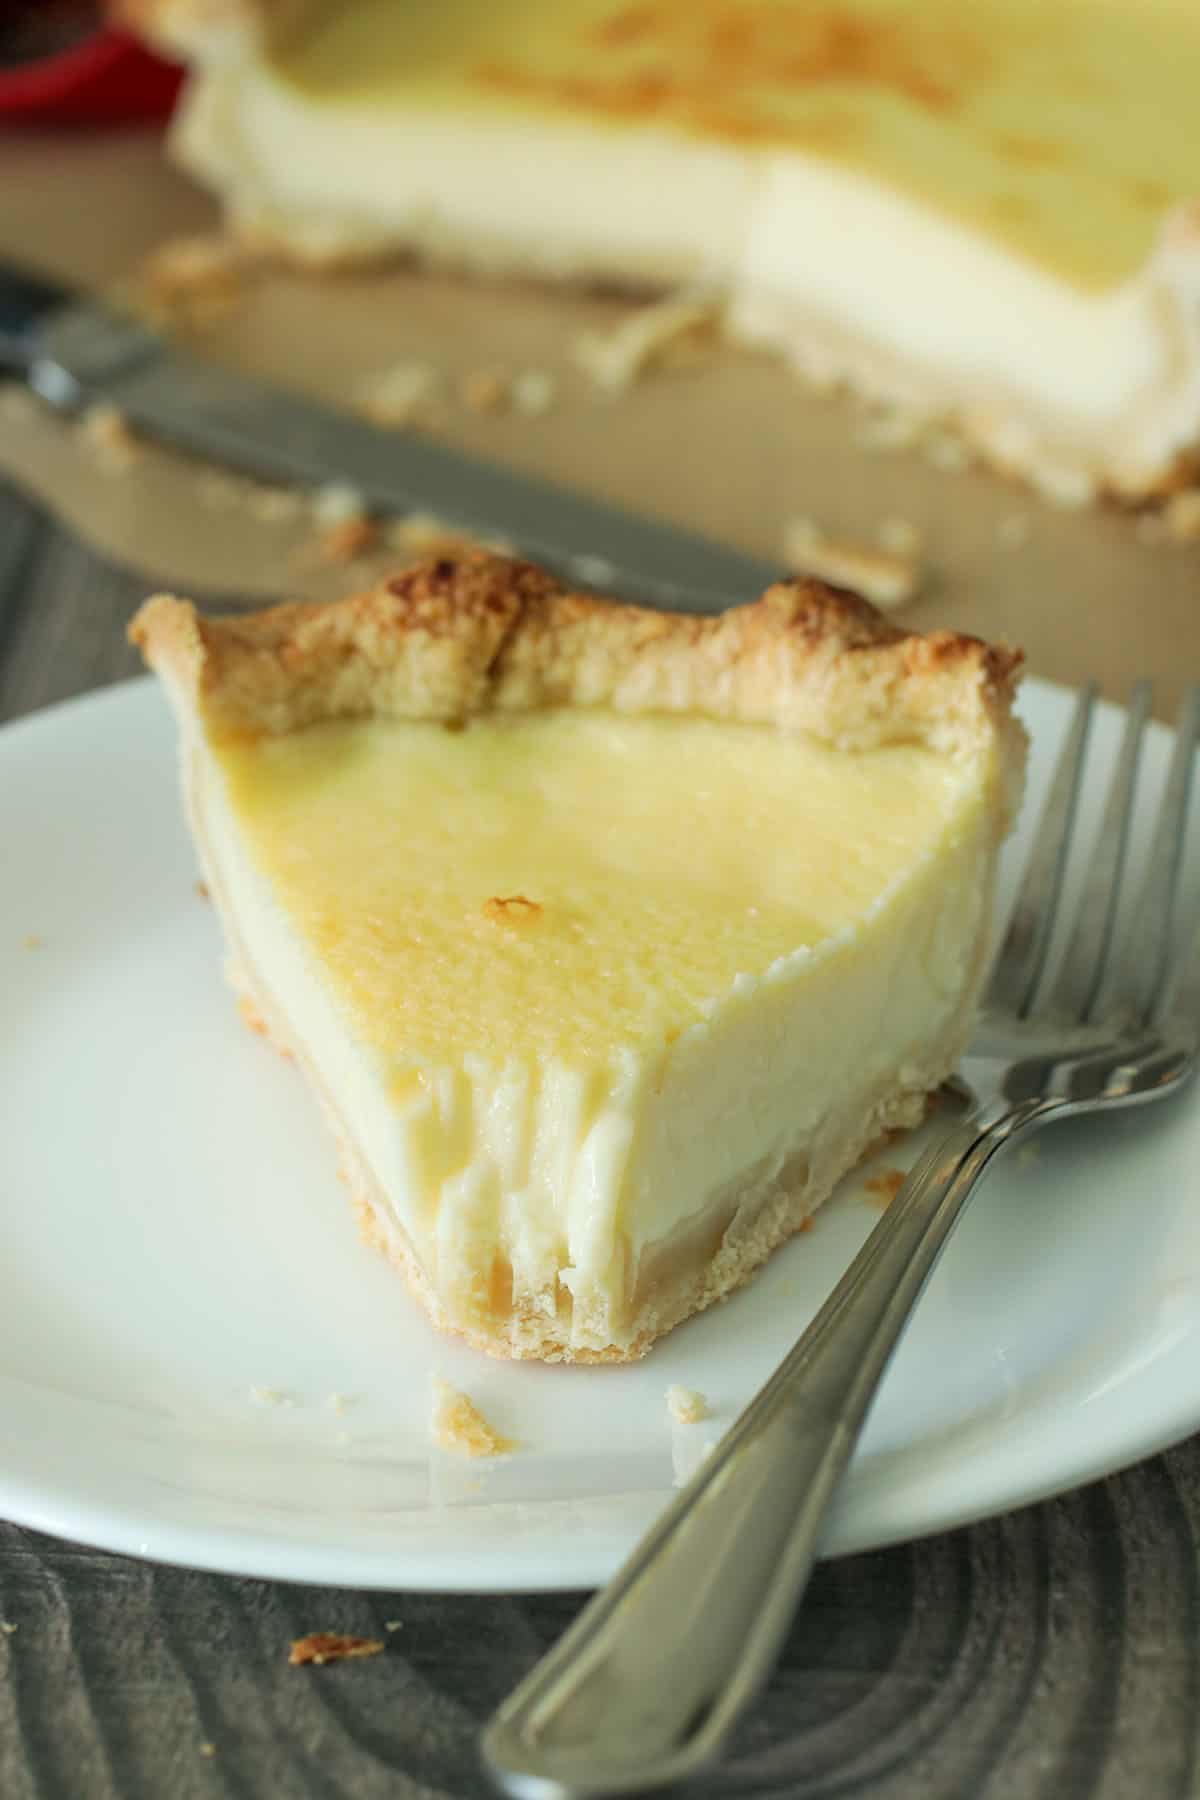 A slice of an Egg Pie.